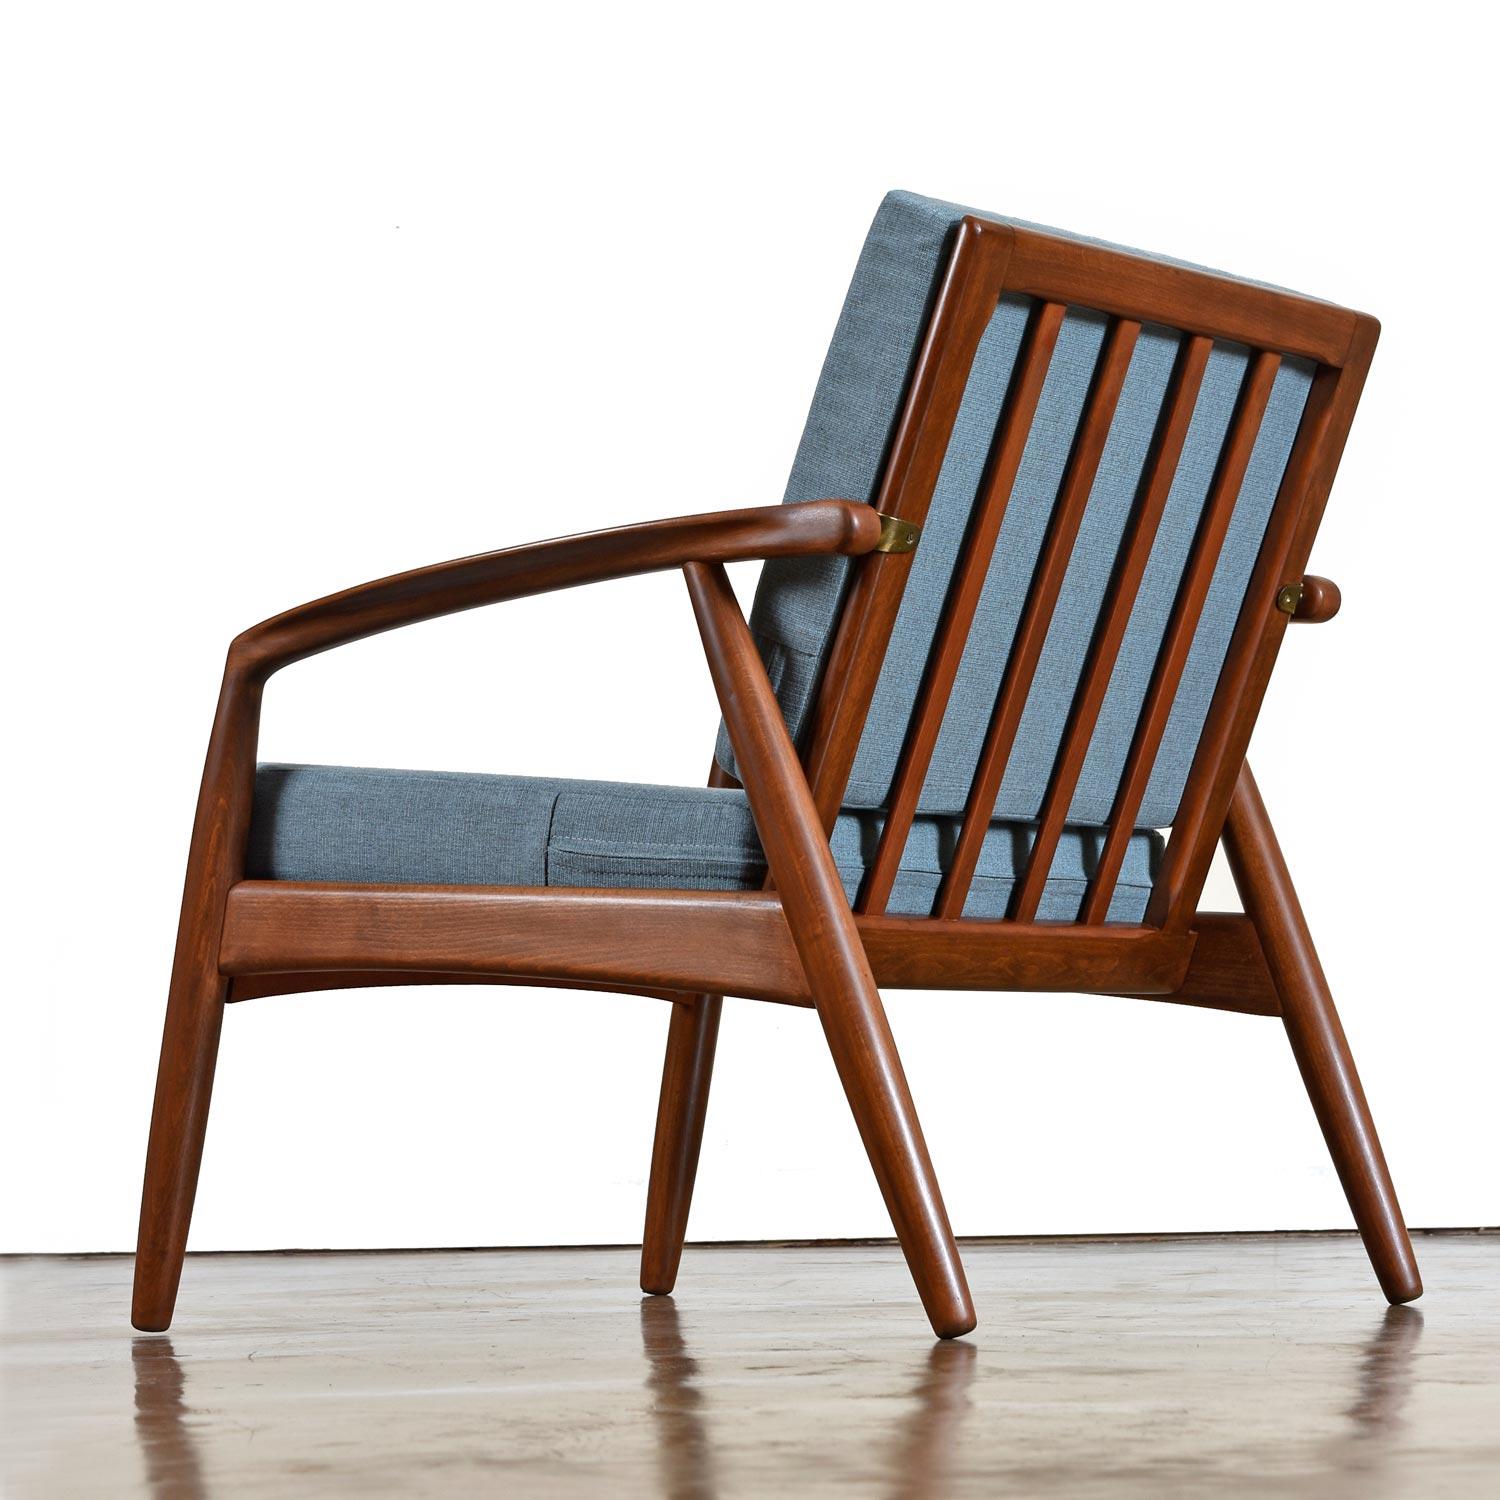 This stunning Danish made lounge chair by Bowa is one of the finest wood frame sofa’s we have seen from the period. Vintage early 1960s, Svend Age Madsen expands on the quintessential wood frame armchair to create something truly special. The arched